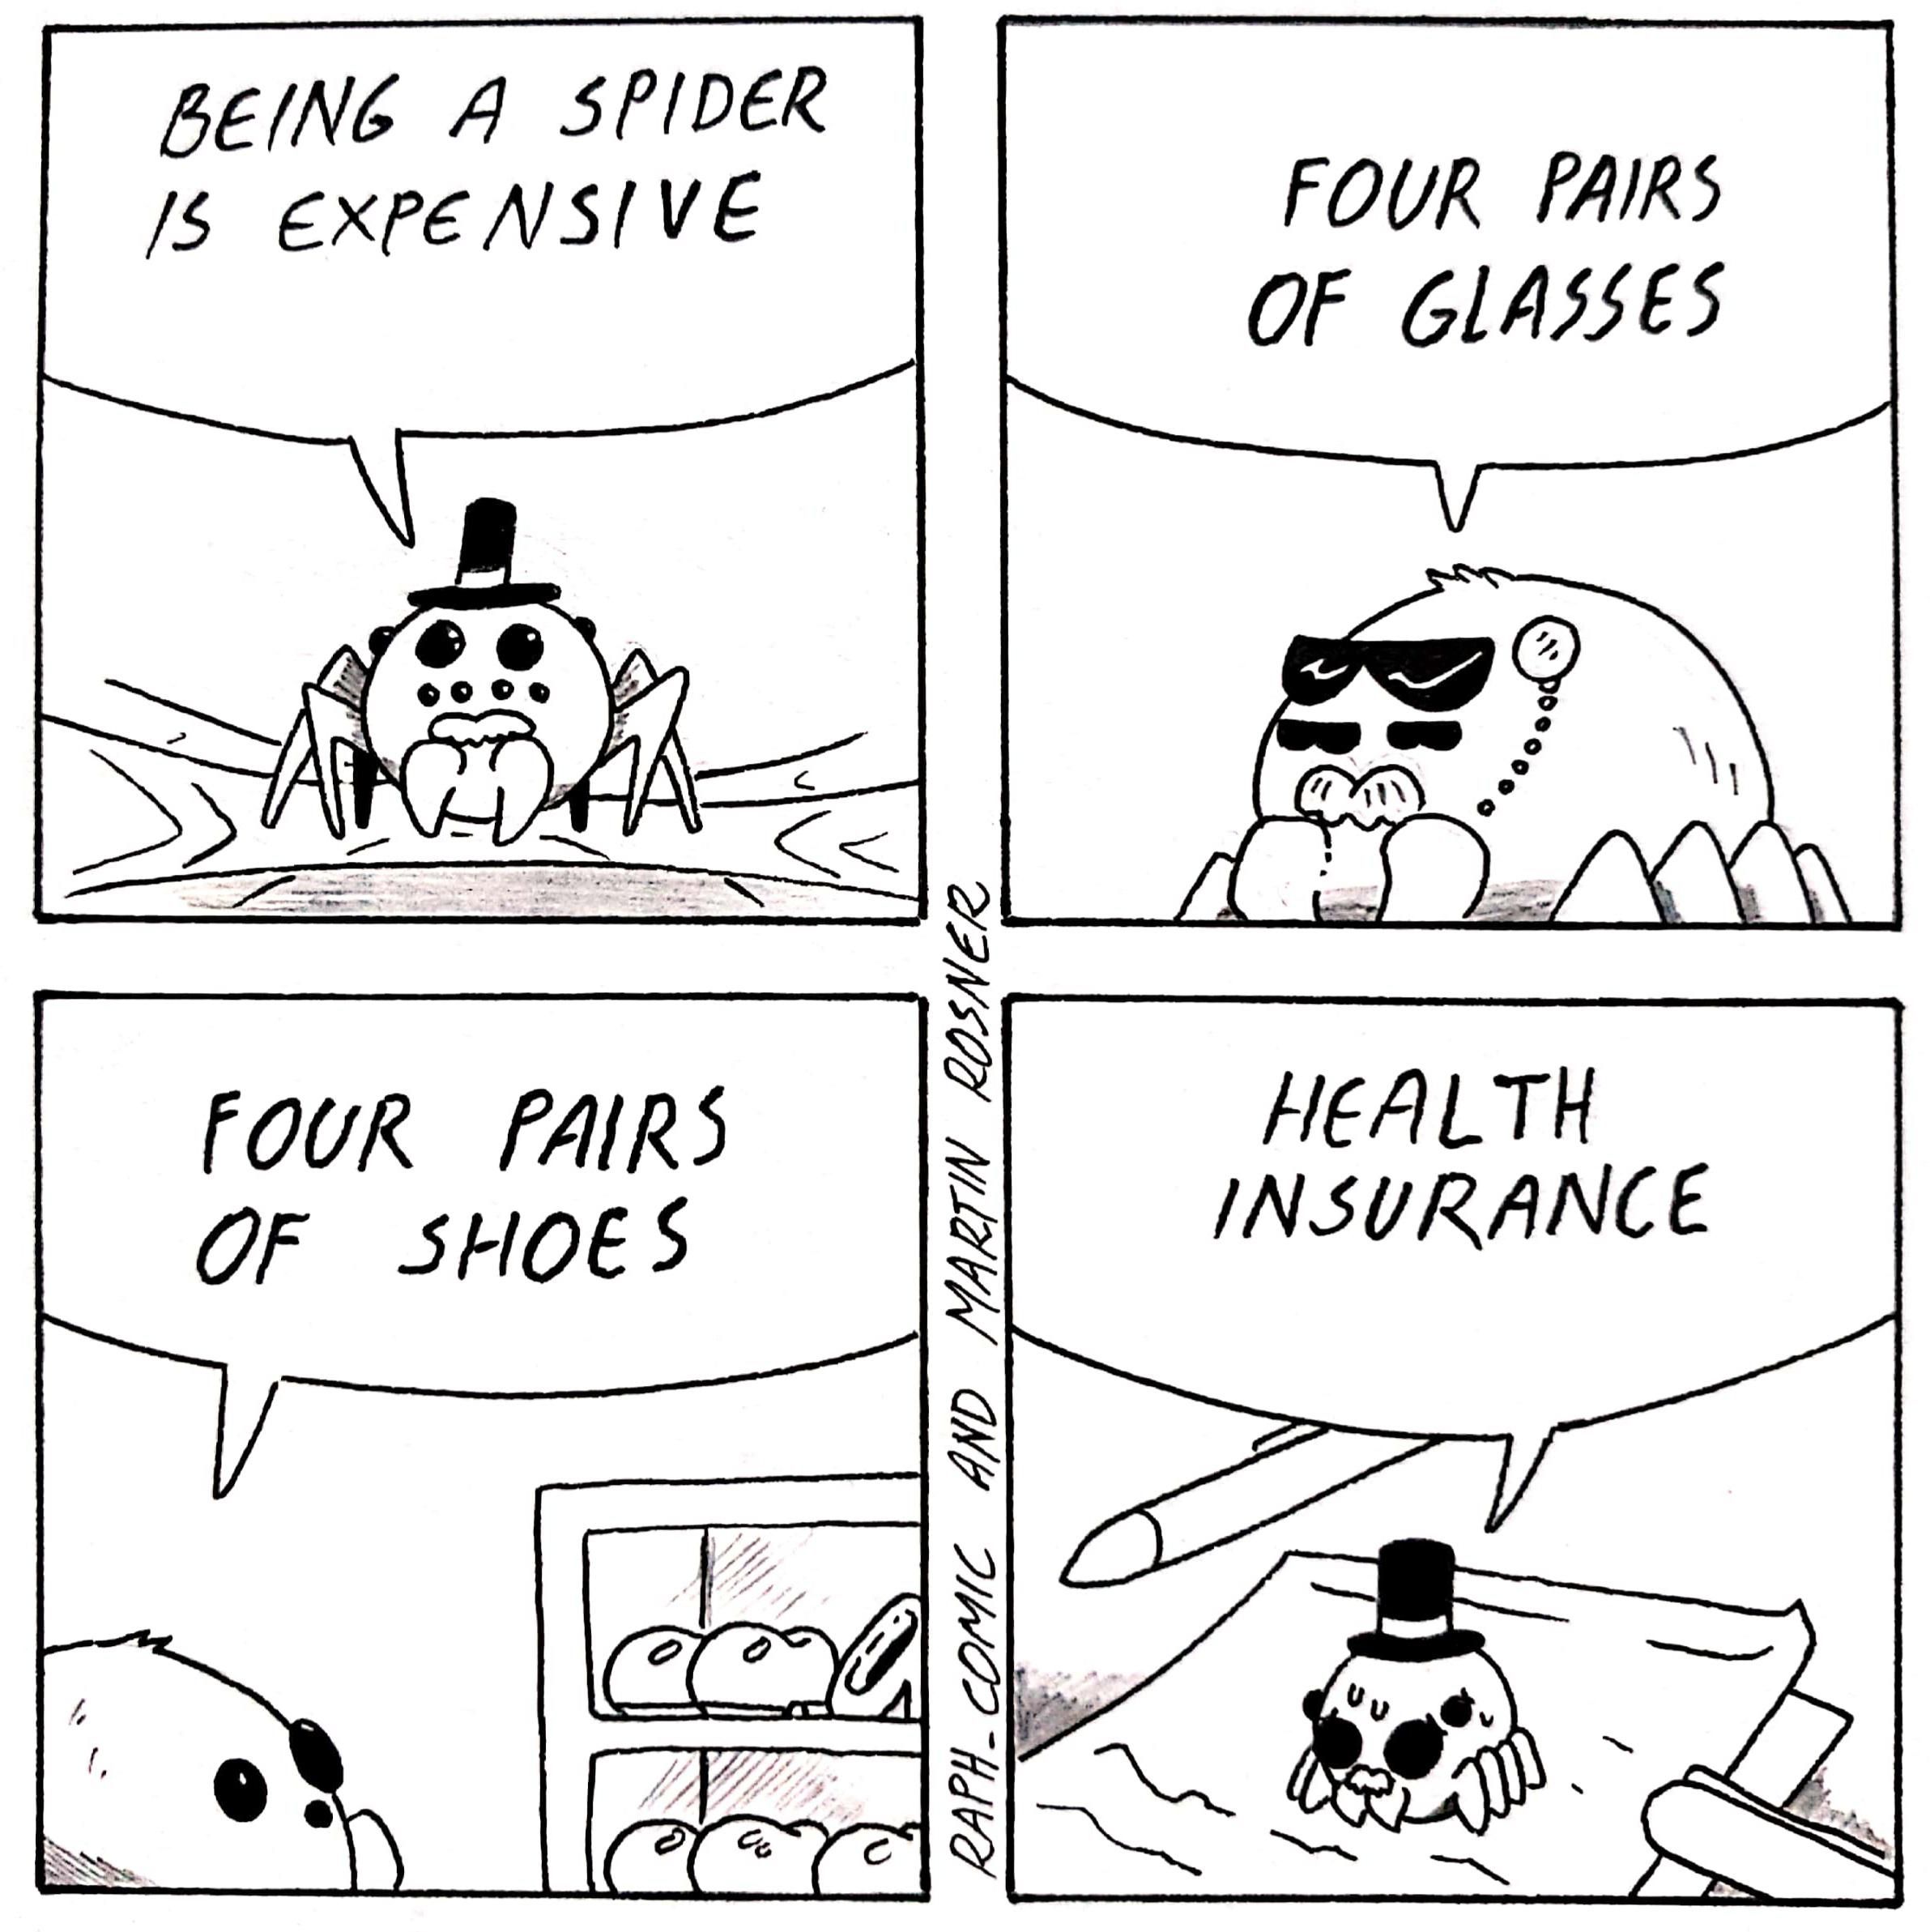 Being a spider is expensive